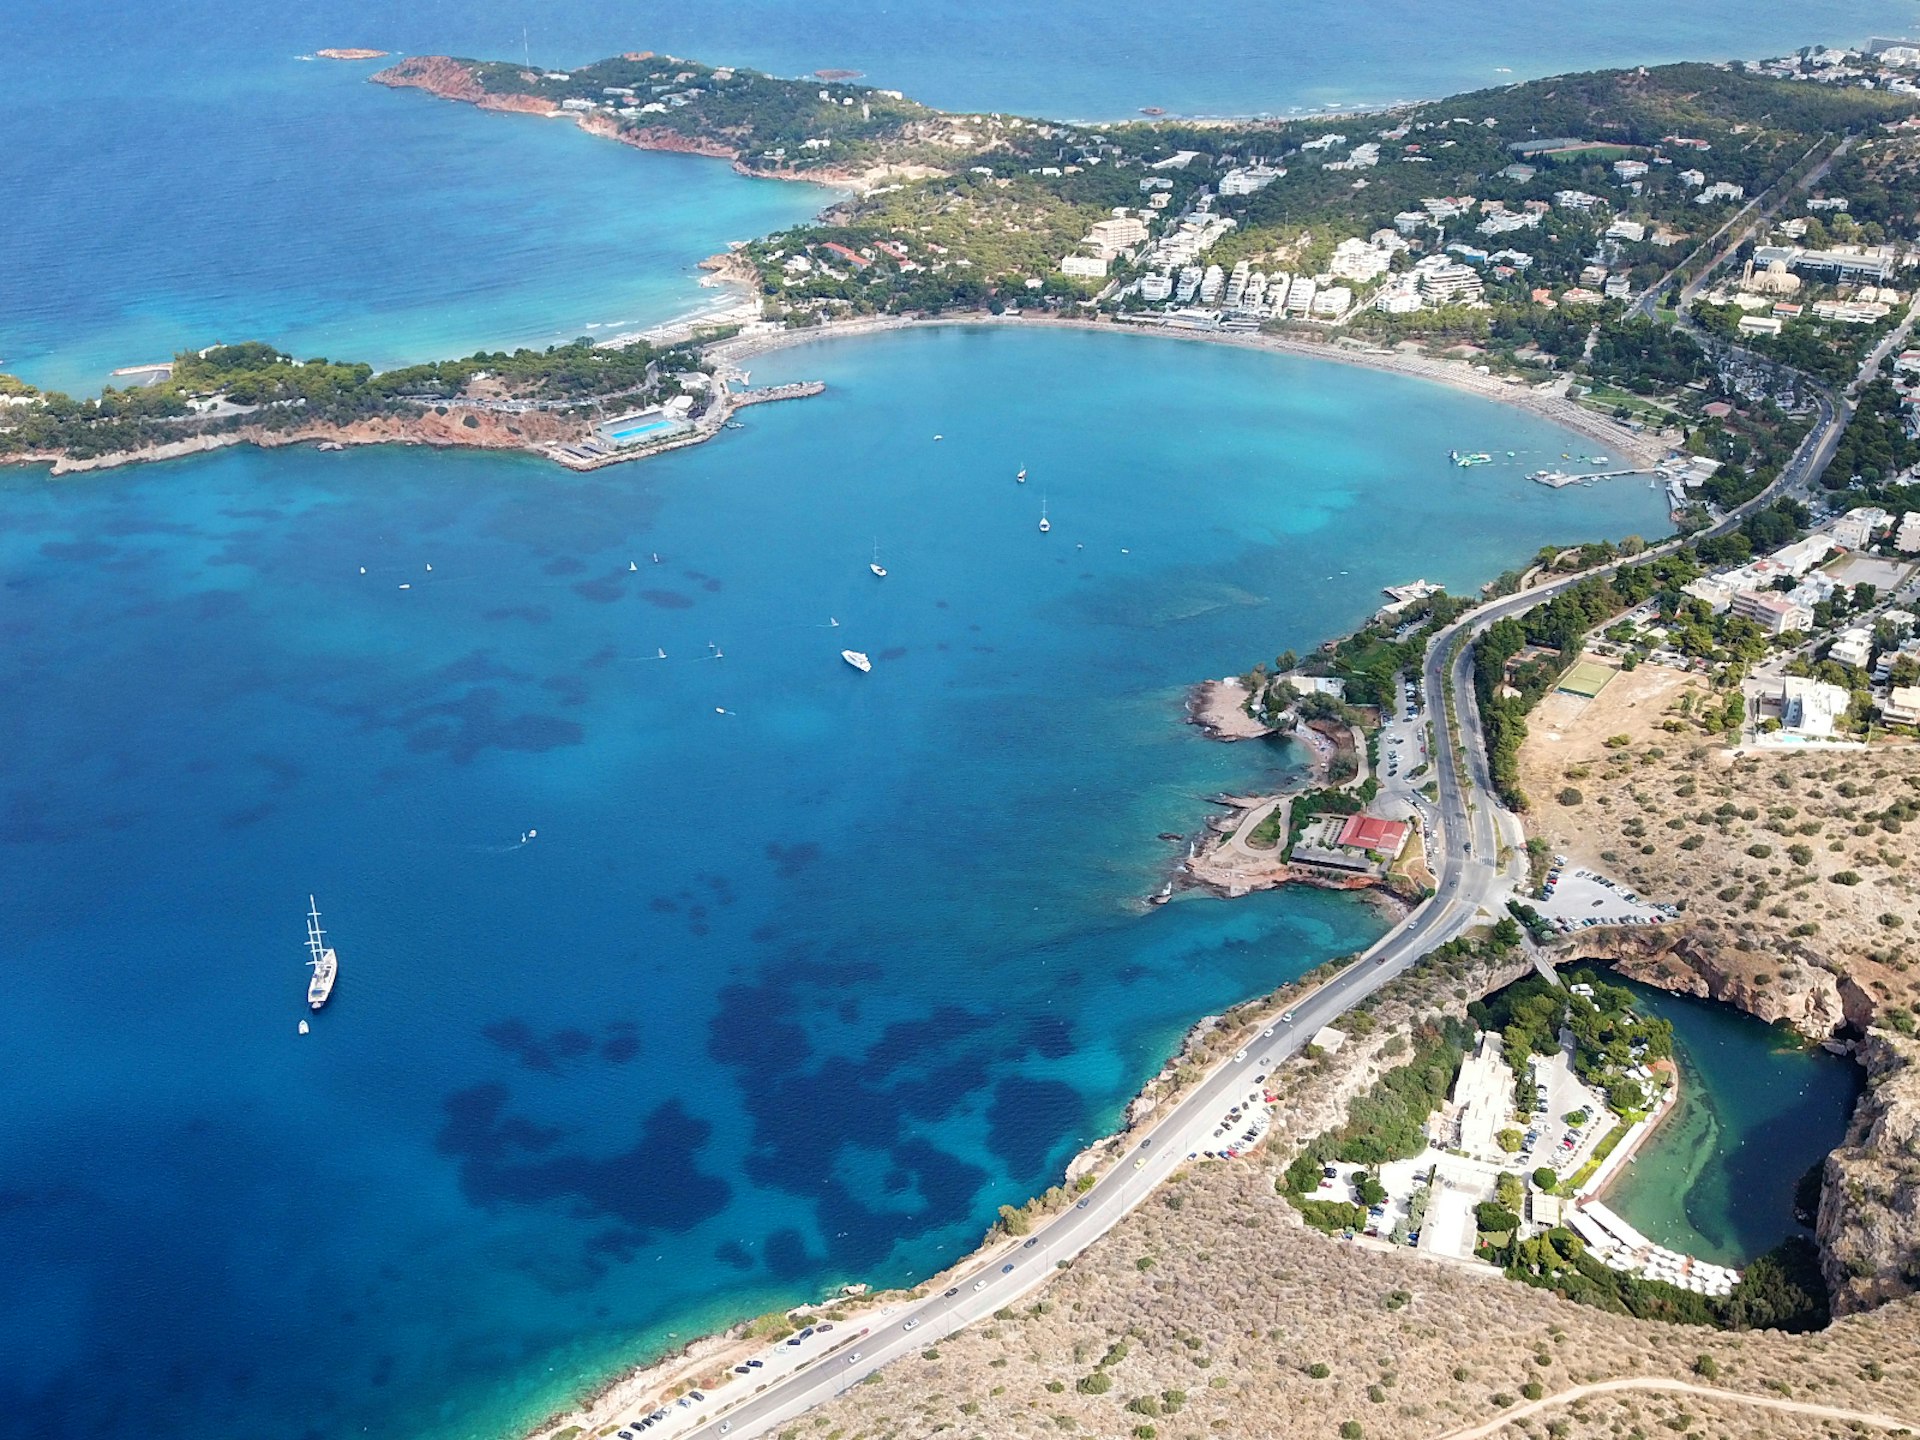 An aerial view of the Athenian Riviera